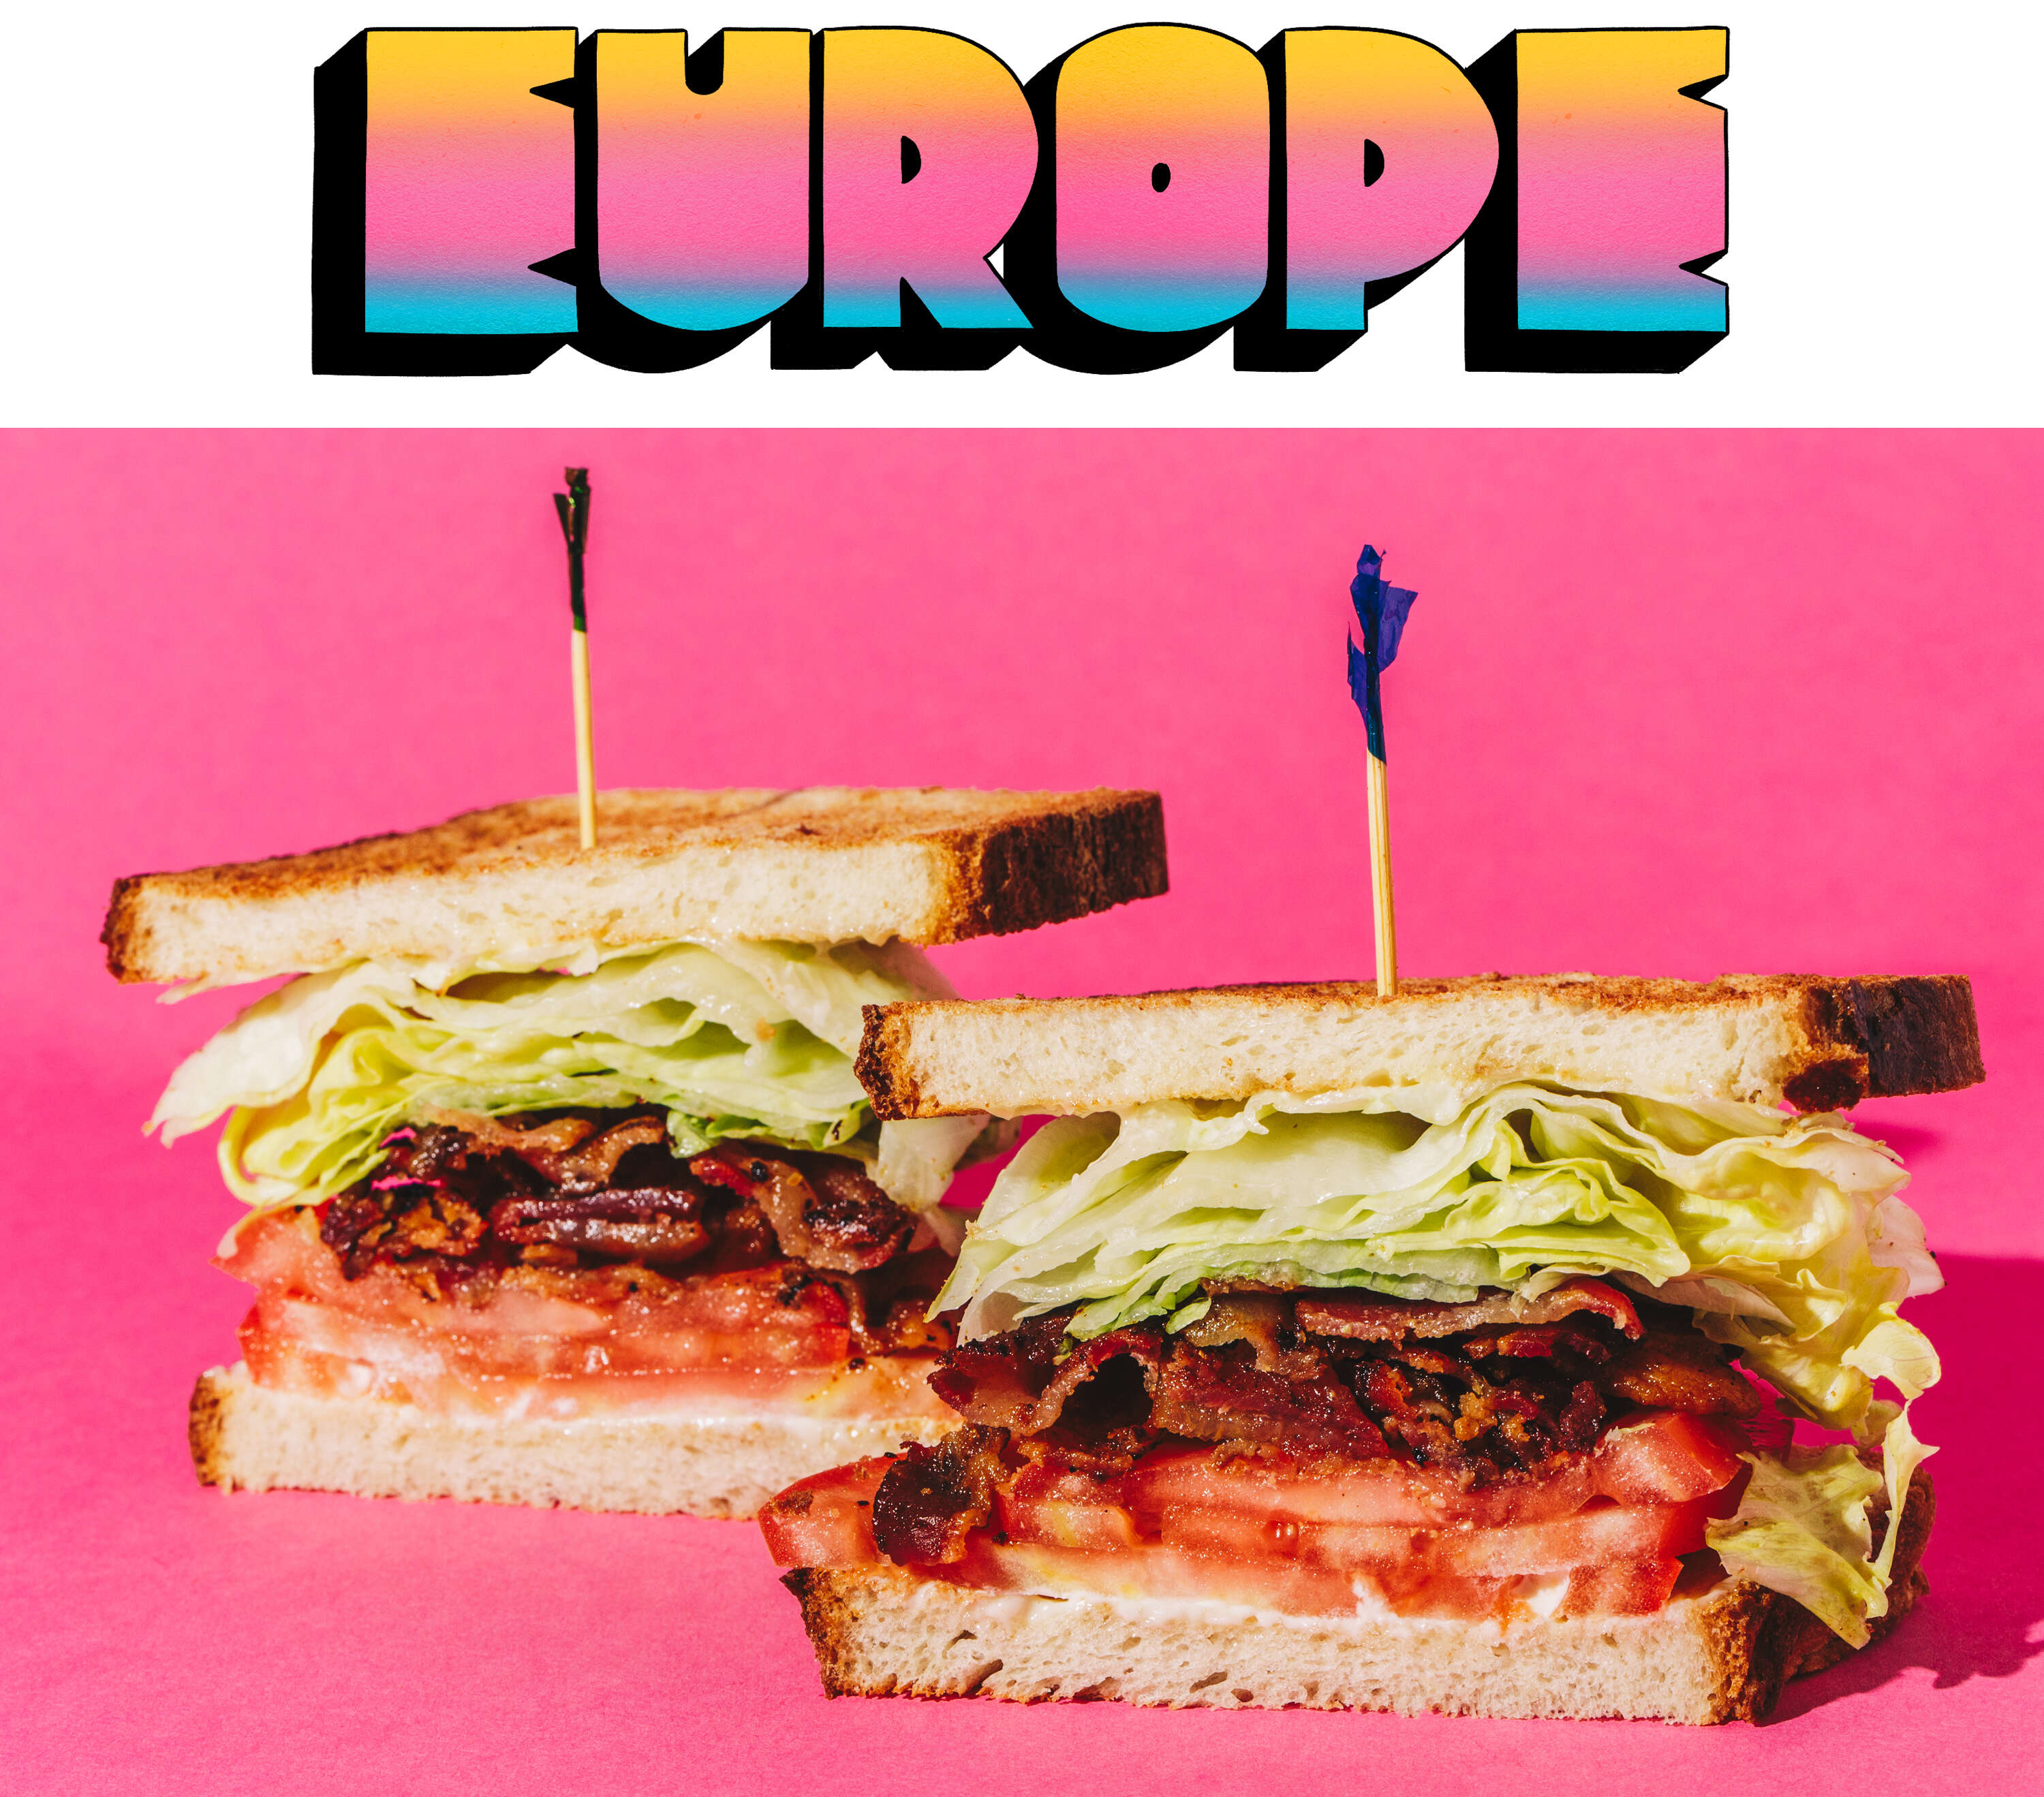 Europe and BLT